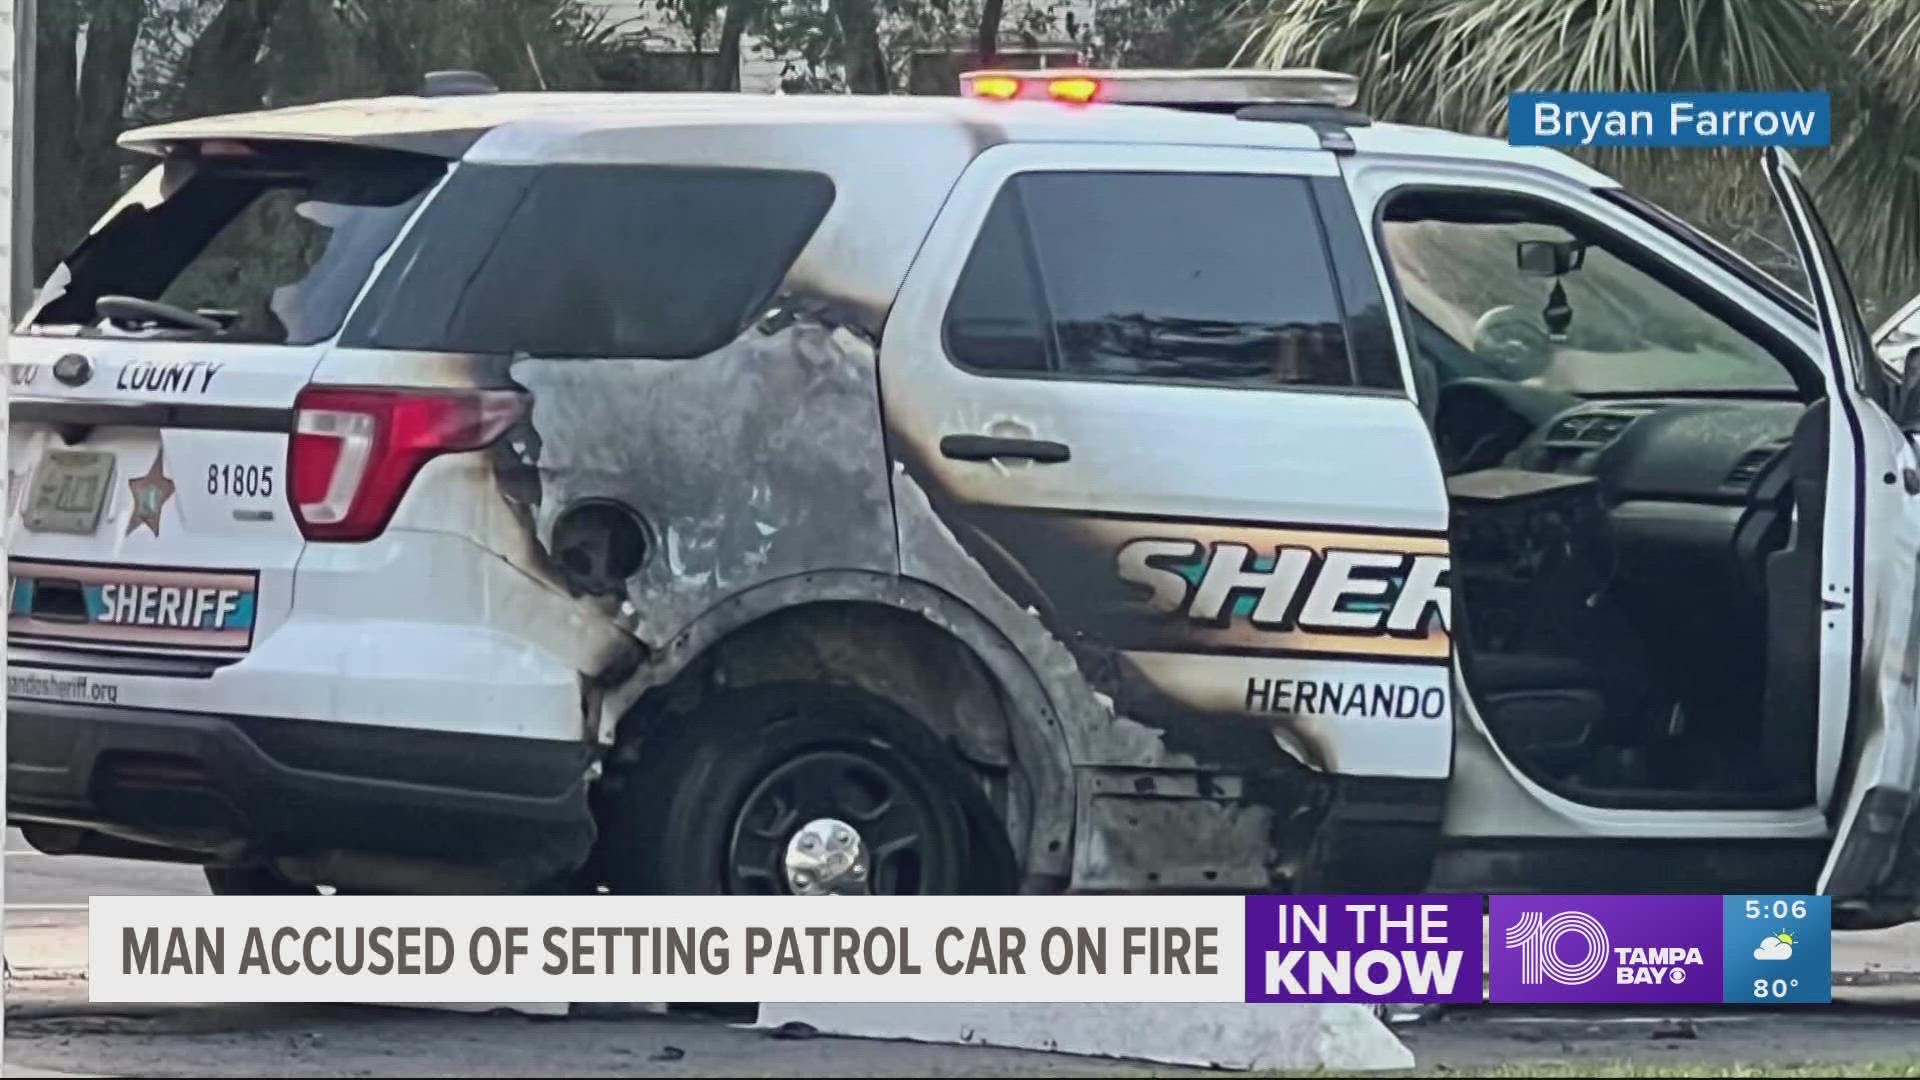 Anthony Thomas Tarduno, 48, told detectives that the patrol SUV was not targeted and "any car that had been parked there would have been set on fire."